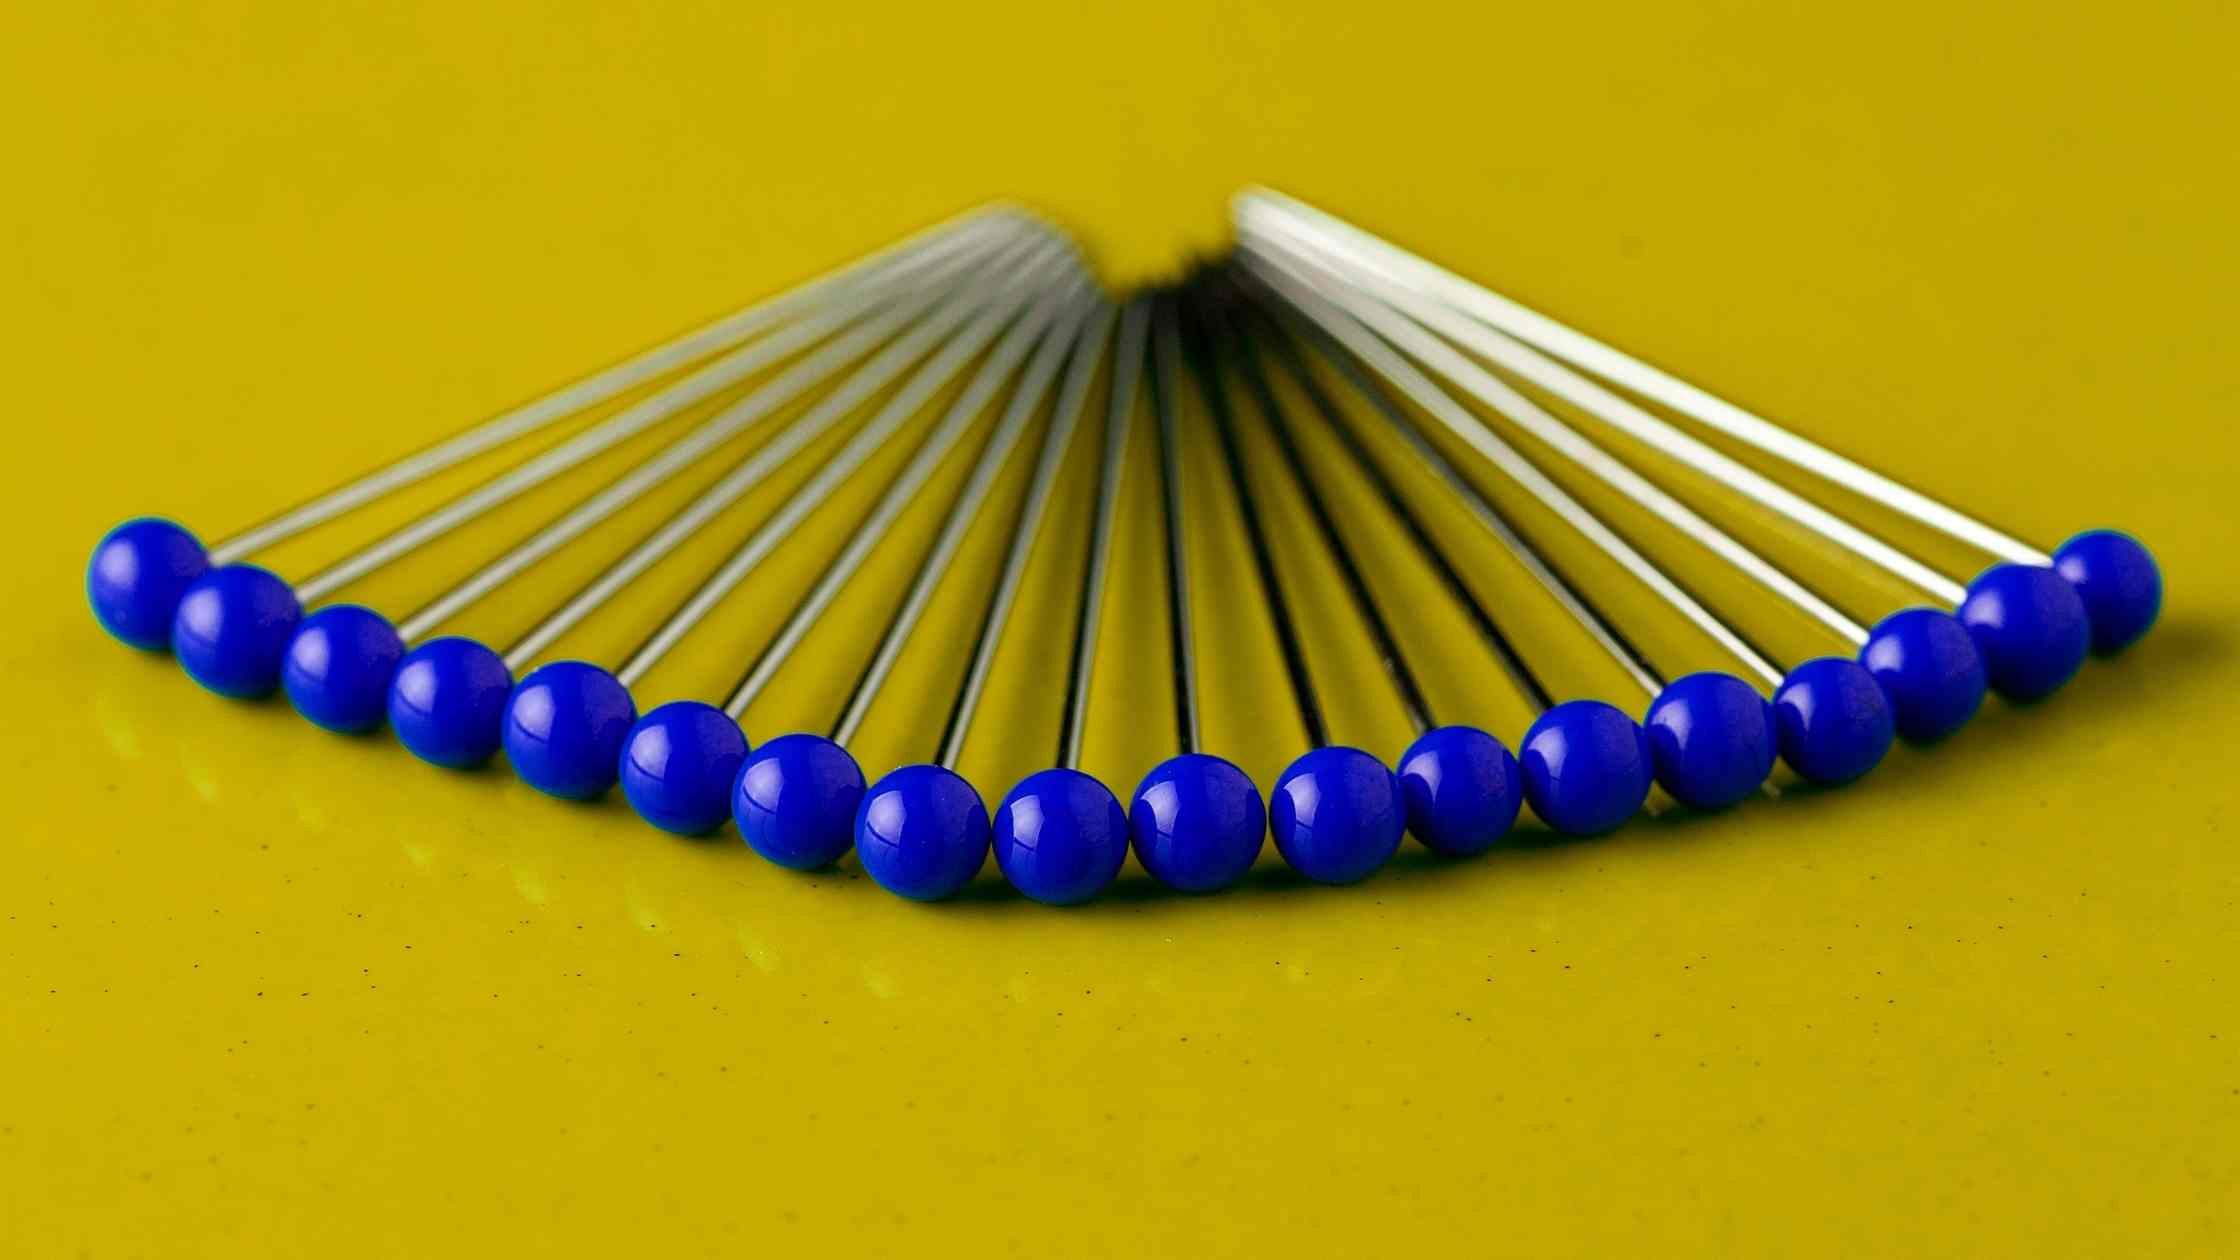 Blue pins on a yellow background